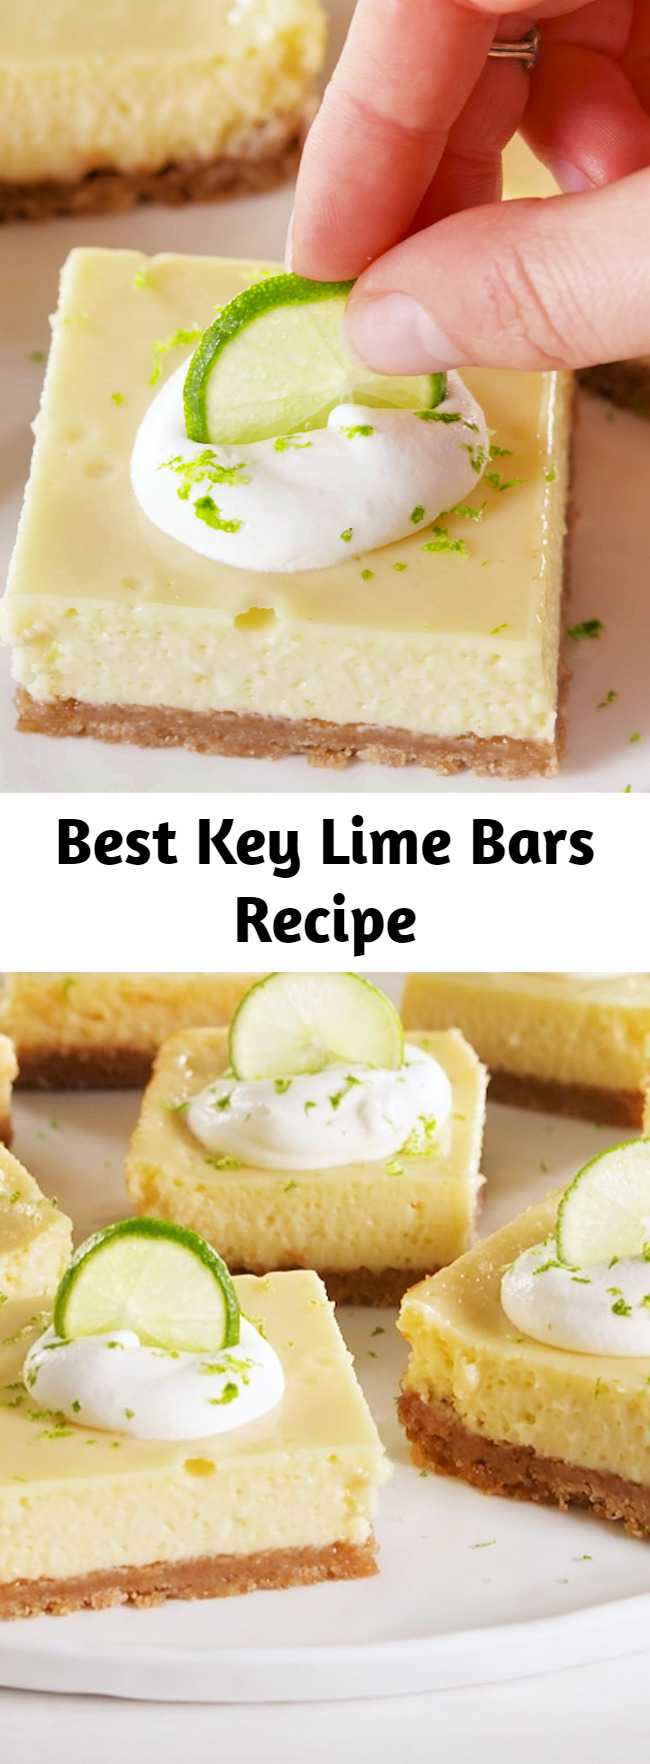 Best Key Lime Bars Recipe - No added sugar is needed in these bars! The ever-magical sweetened condensed milk provides all the sugar you need. #easyrecipe #dessert #baking #keylime #sweets